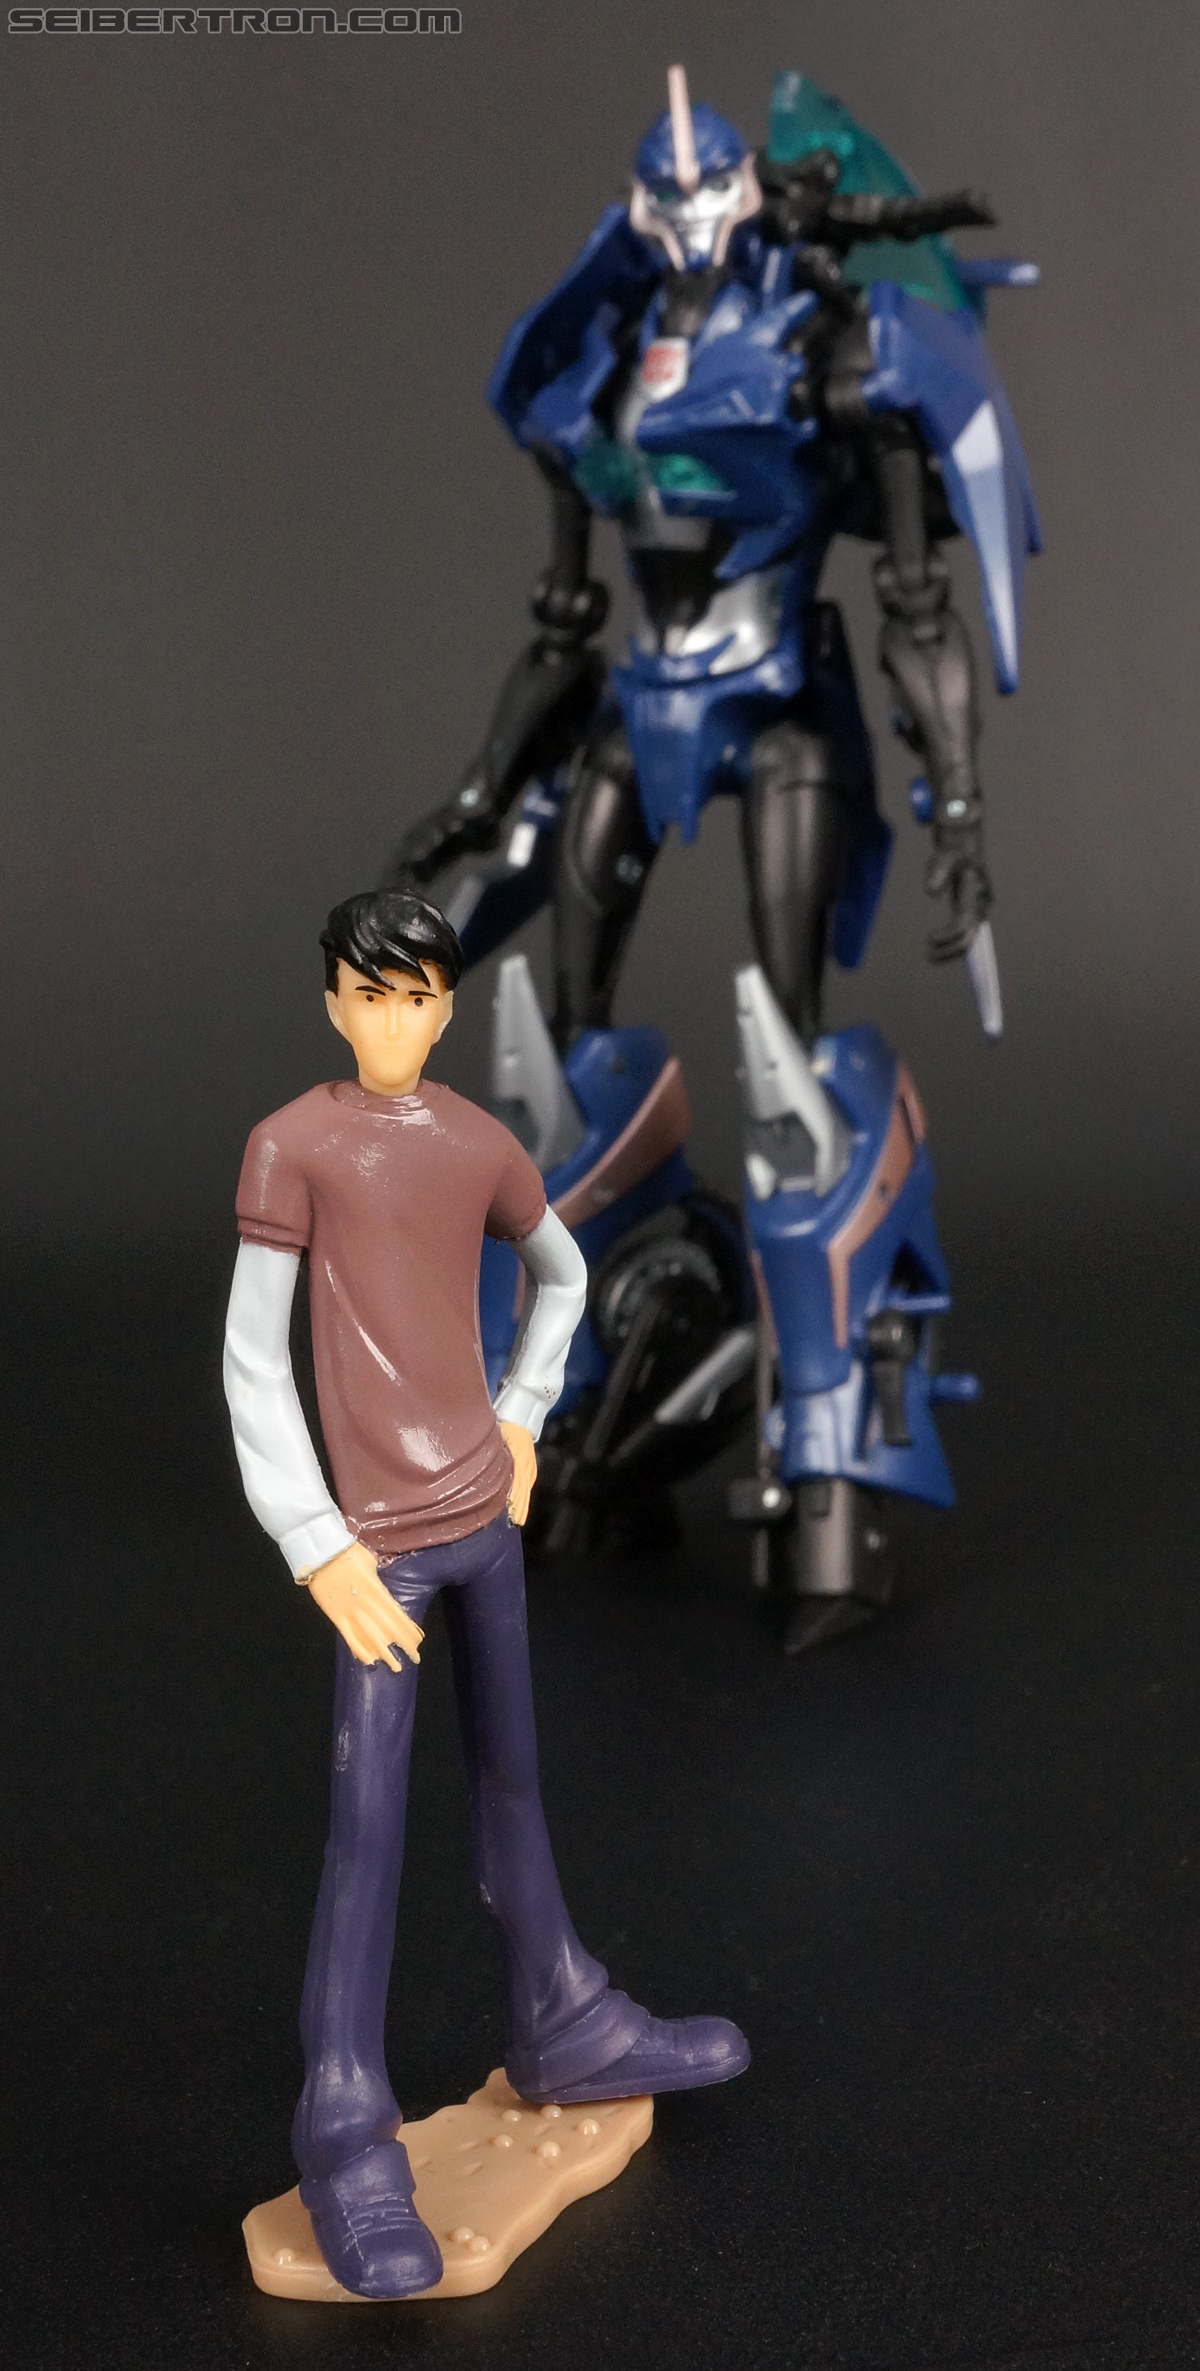 Transformers Prime: First Edition Jack Darby (Image #61 of 66)